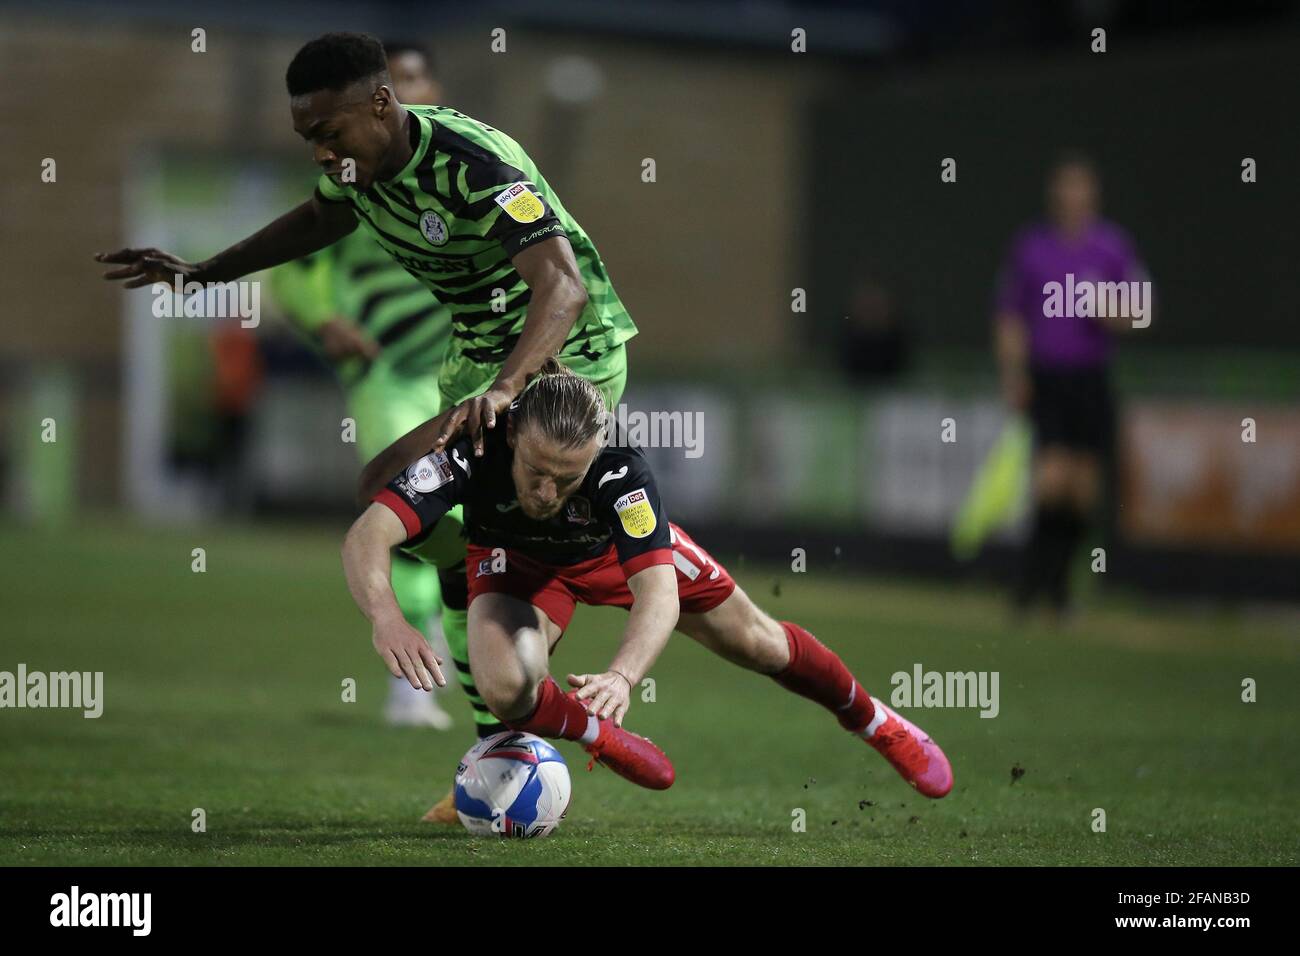 Matt Jay of Exeter City and Ebou Adams of Forest Green Rovers during the Sky Bet League 2 match between Forest Green Rovers and Exeter City at The New Stock Photo